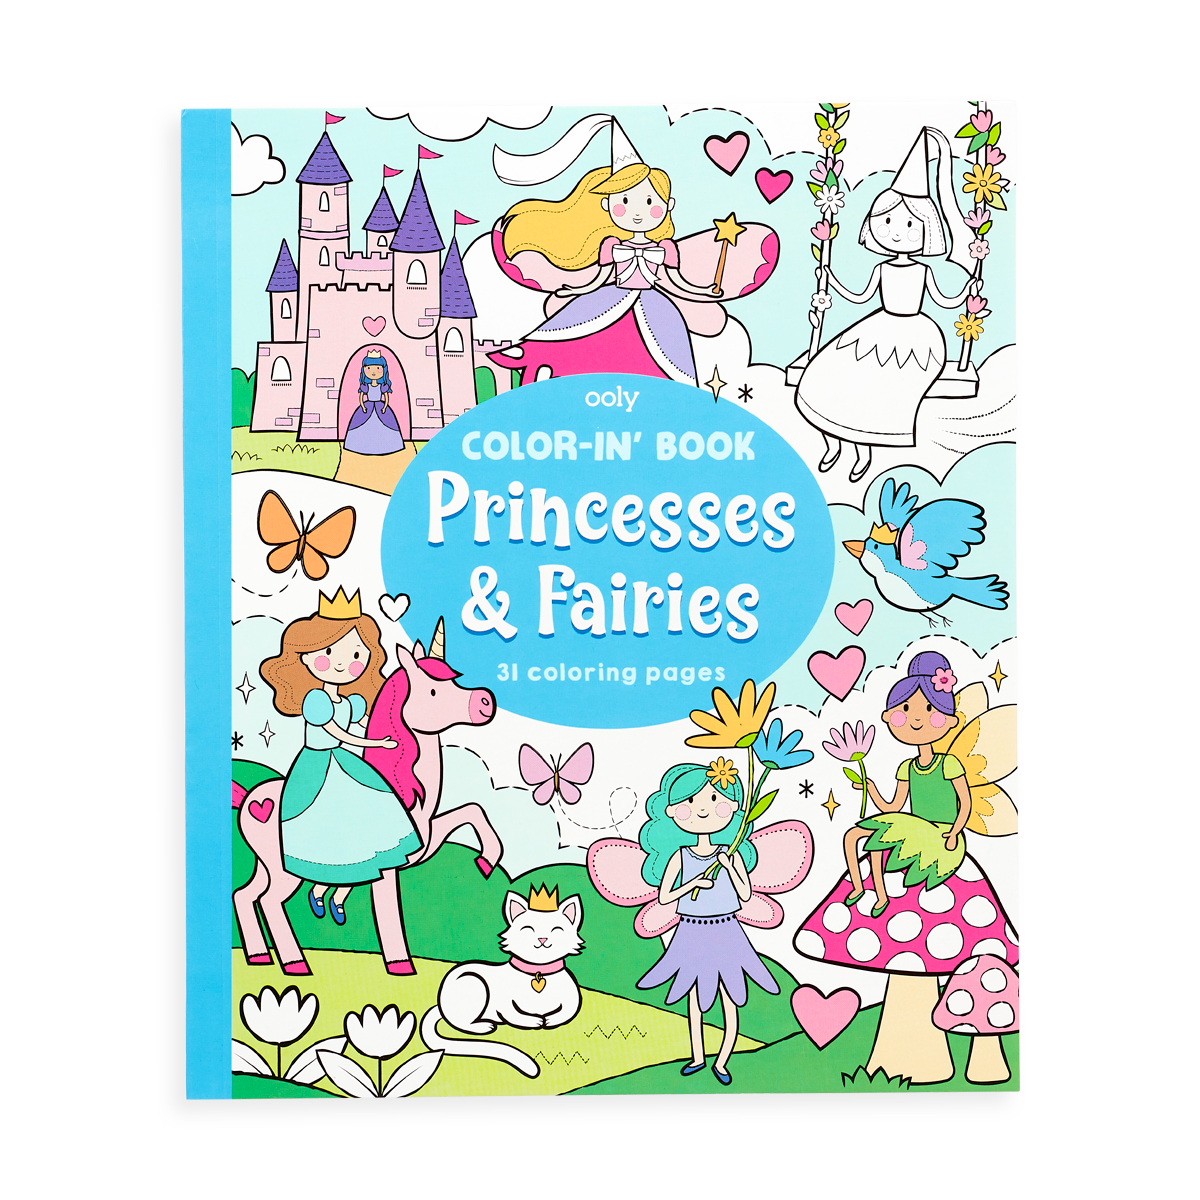 Great Choice Products Disney Princess Coloring Book Set For Kids -  Activities, Stickers And Games - Featuring Disney